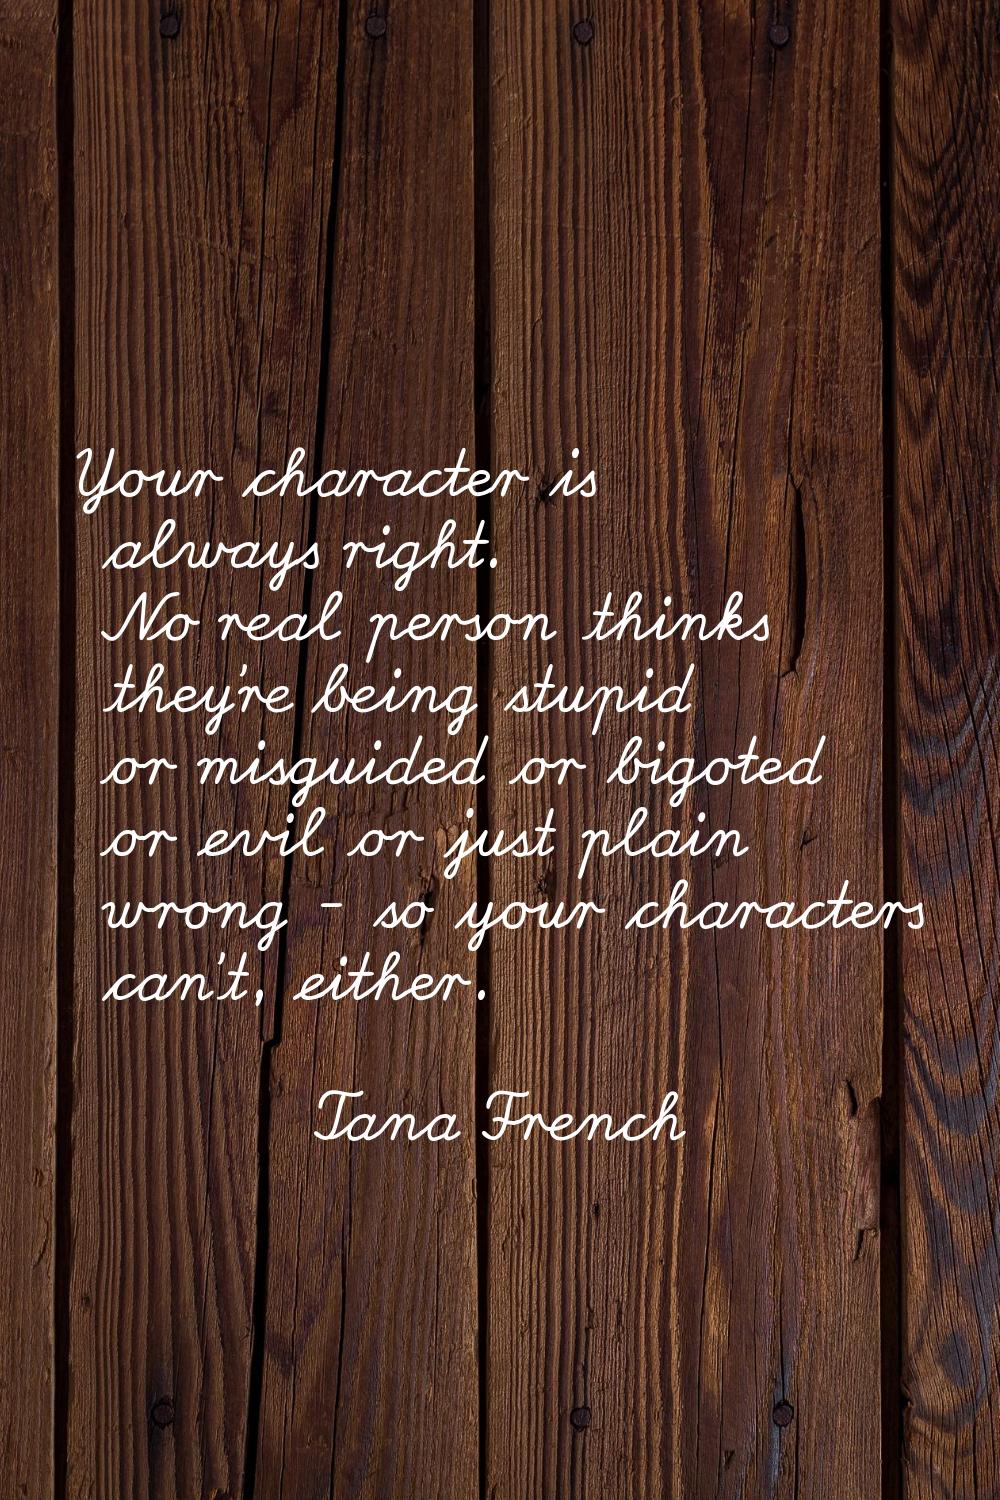 Your character is always right. No real person thinks they're being stupid or misguided or bigoted 